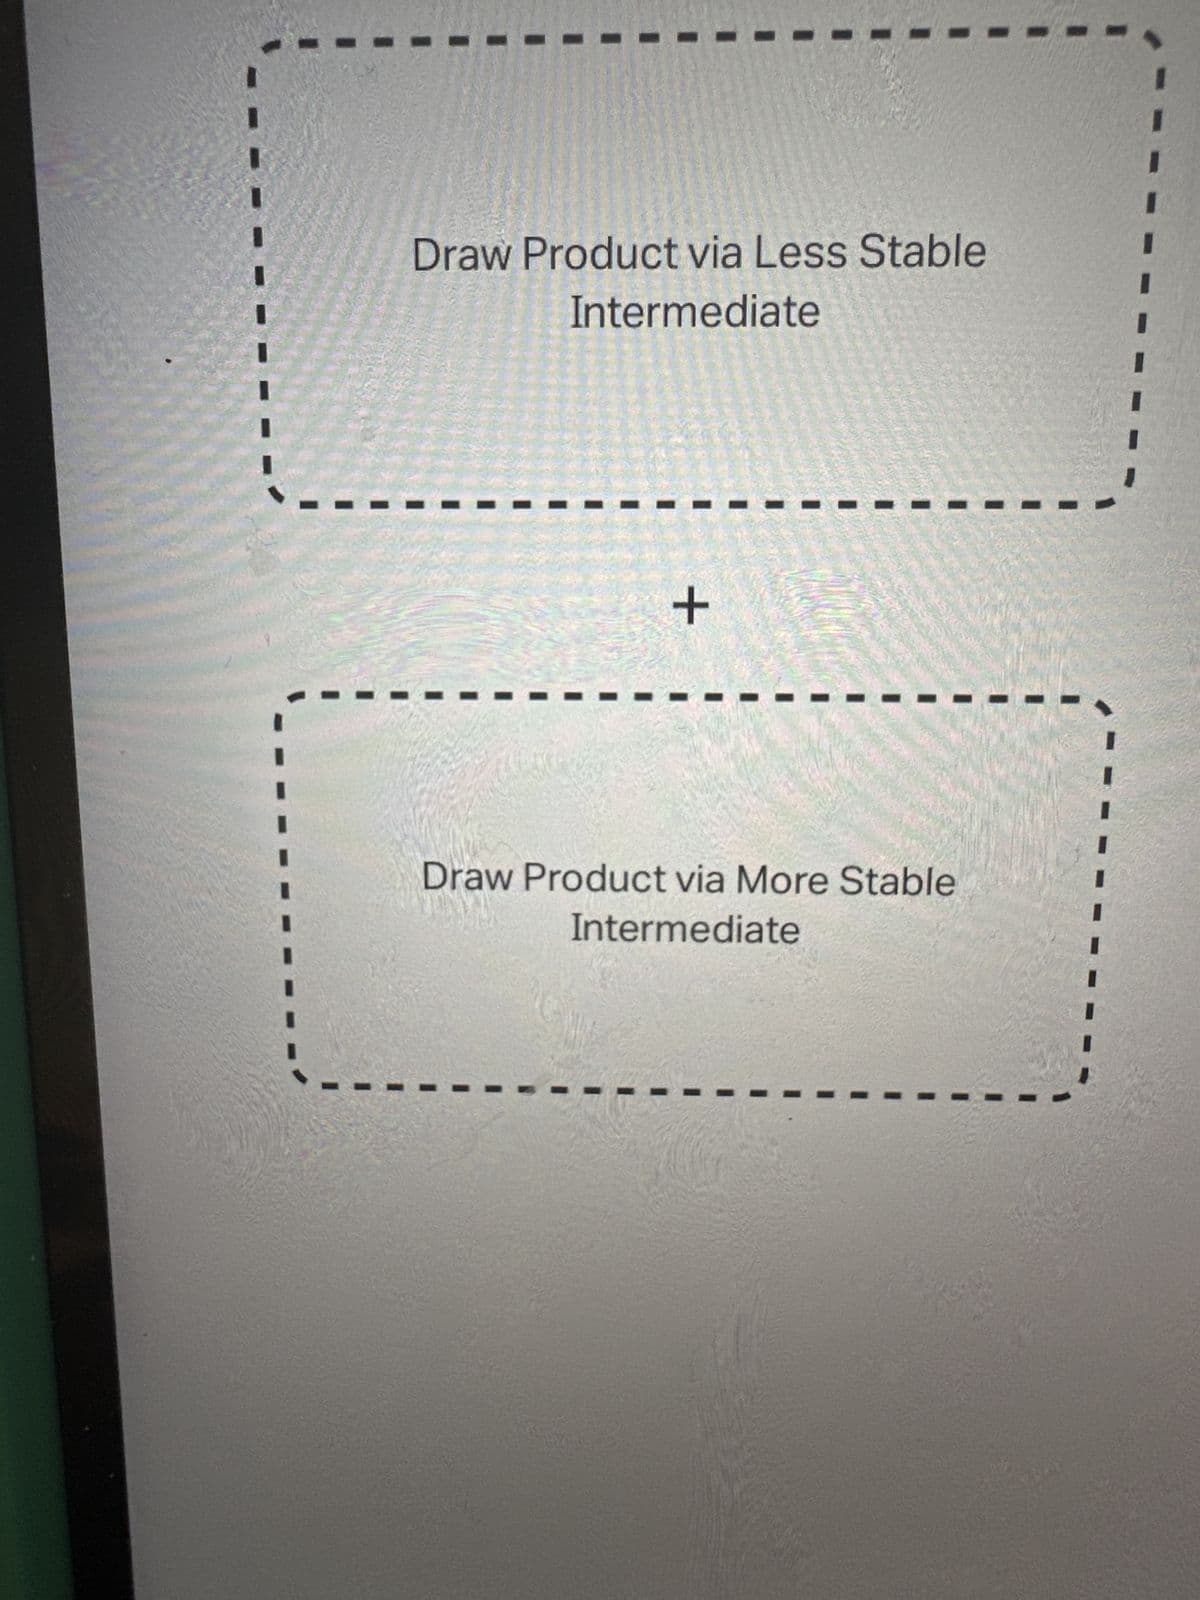 Draw the two possible prod
that result from the less stable enolate and the
more stable intermediates. Ignore inorganic
byproducts.
1. Strong Base
2. CH3CH2Br (1 equiv)
ROP
Draw Product via Less Stable
Intermediate
+